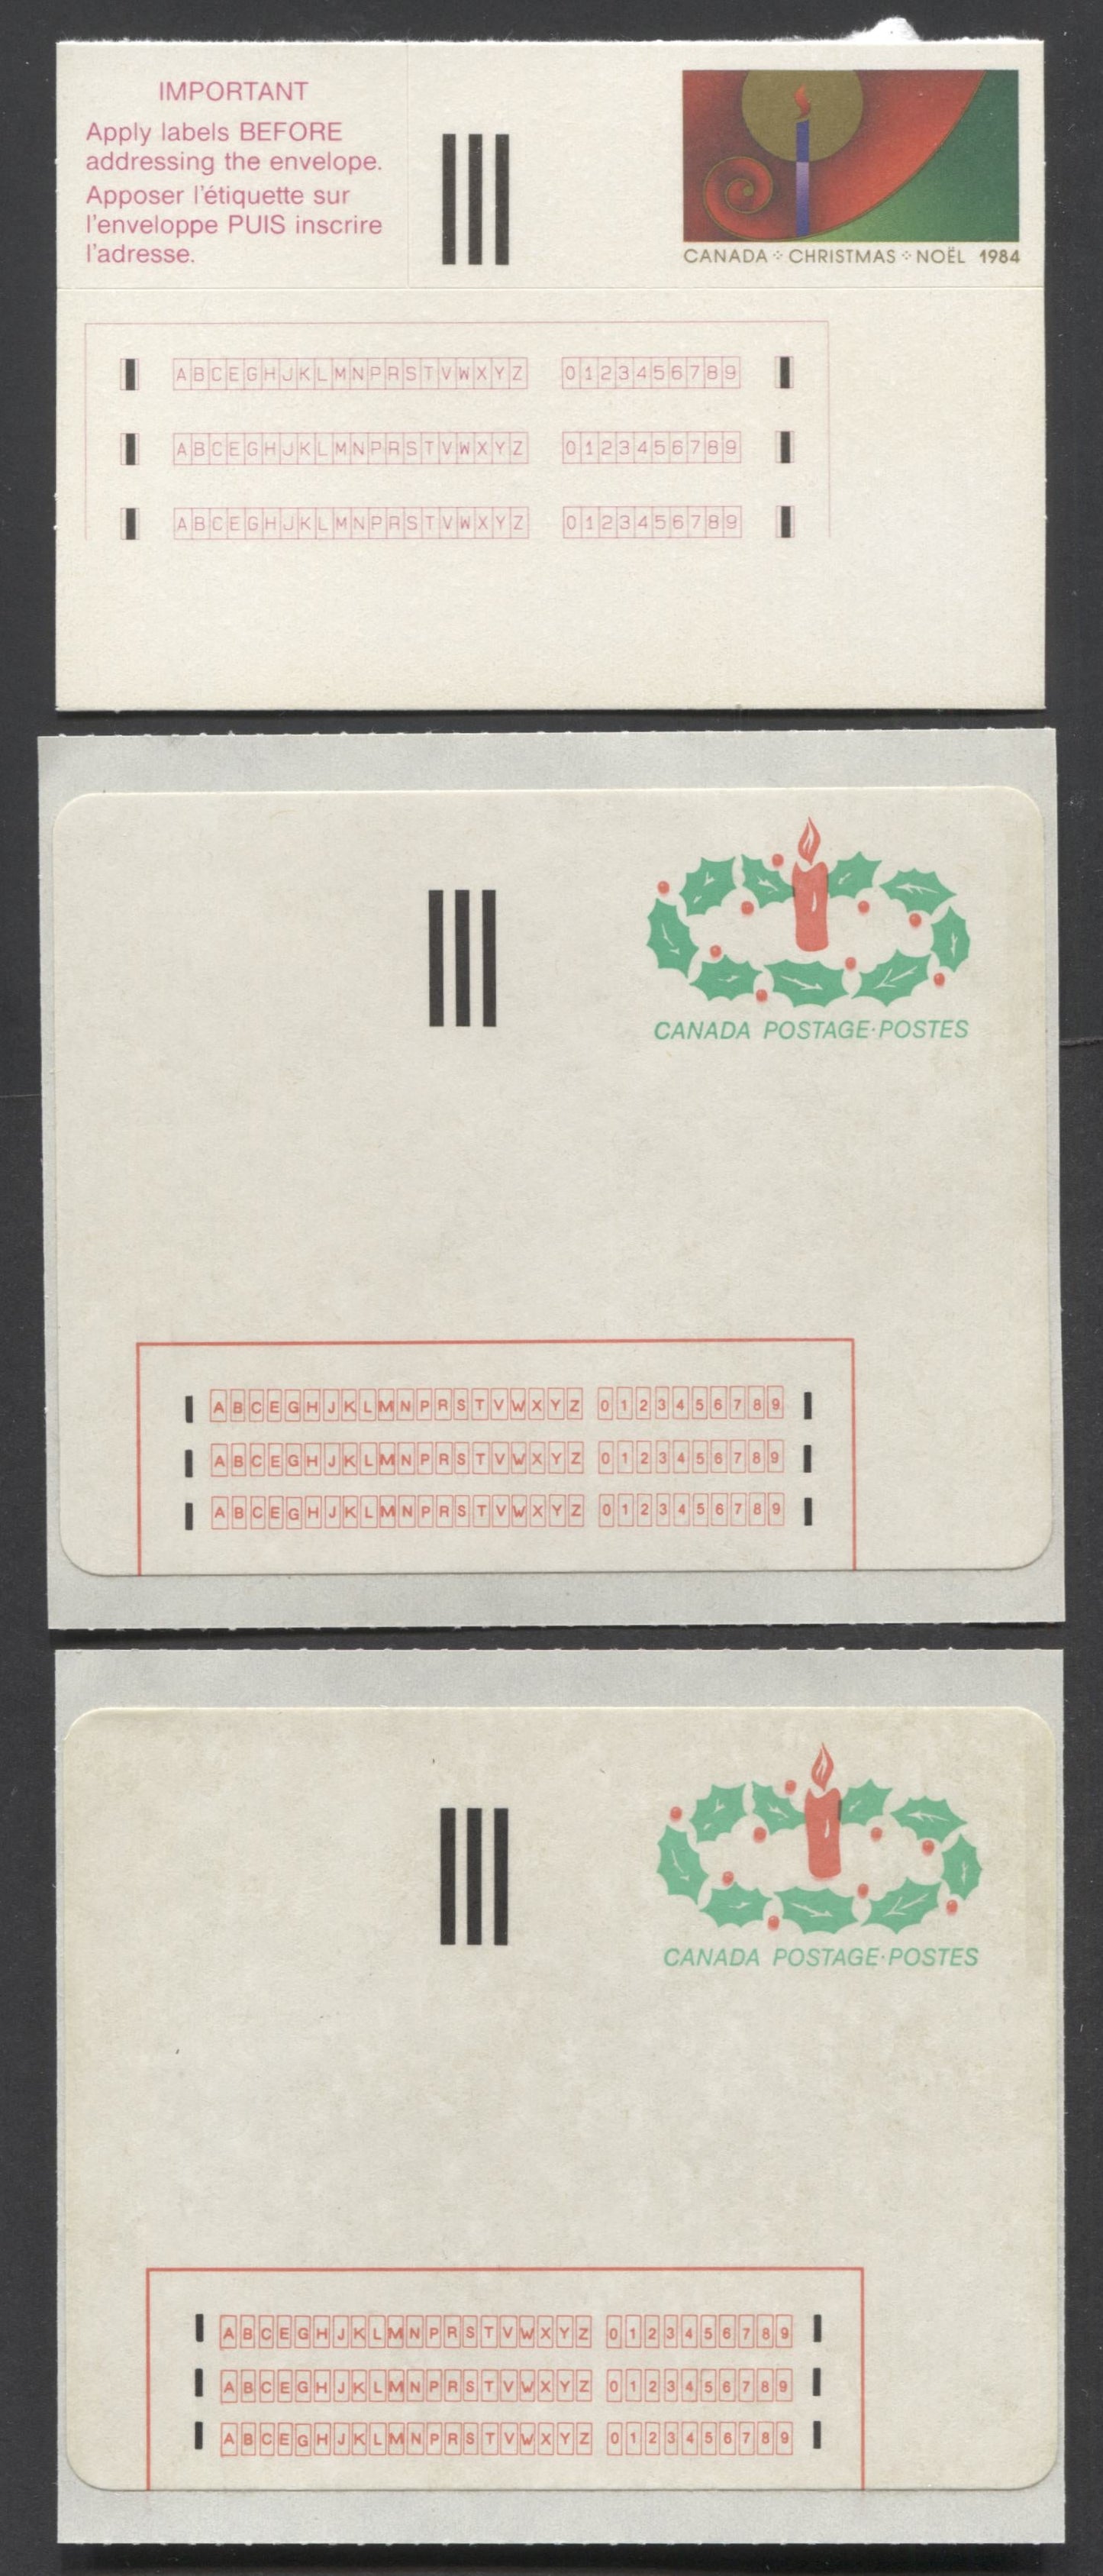 Lot 45 Canada #1ST, 2ST  Multicolored Candle & Holly, 1983-1984 Christmas Issue, 3 VFNH Stick N' Tic Labels With Strong & Weaker Tag Bars On The 1983 Label, Labels Are MF/HF & LF Papers